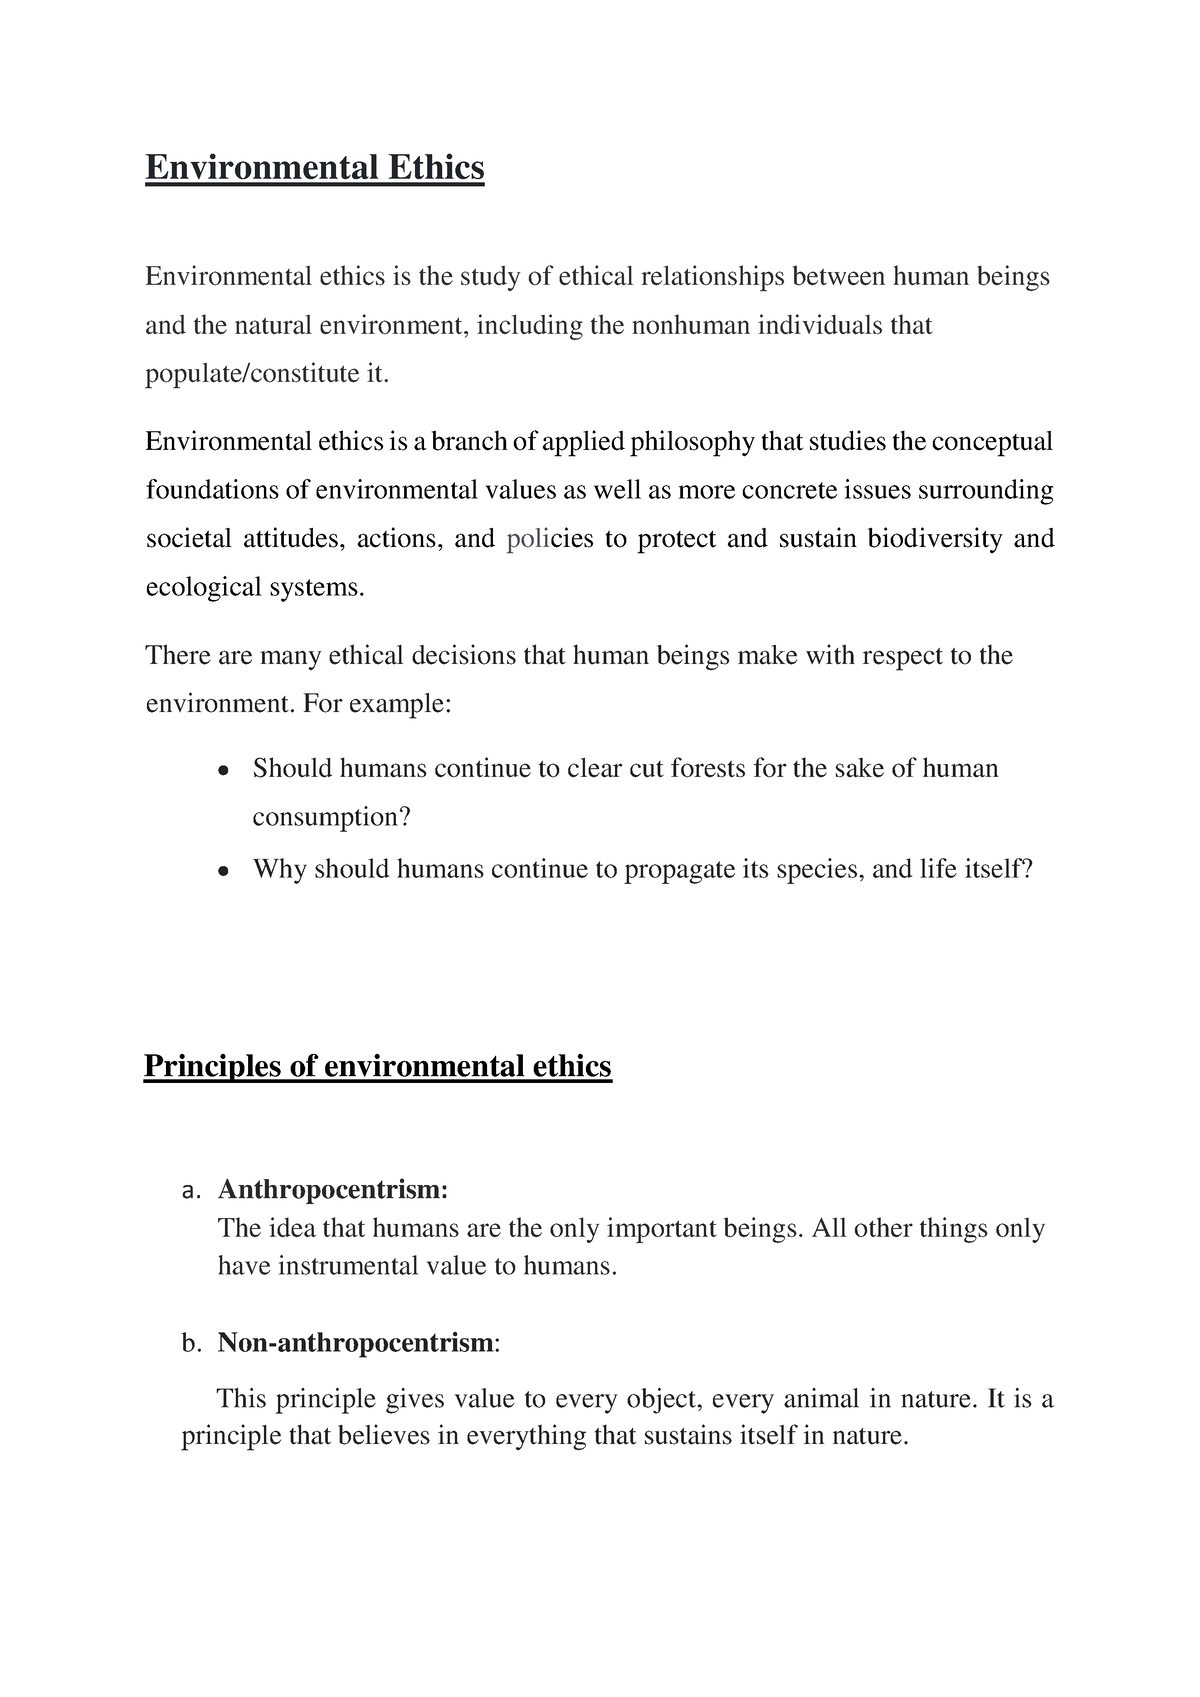 reflection essay about environmental ethics